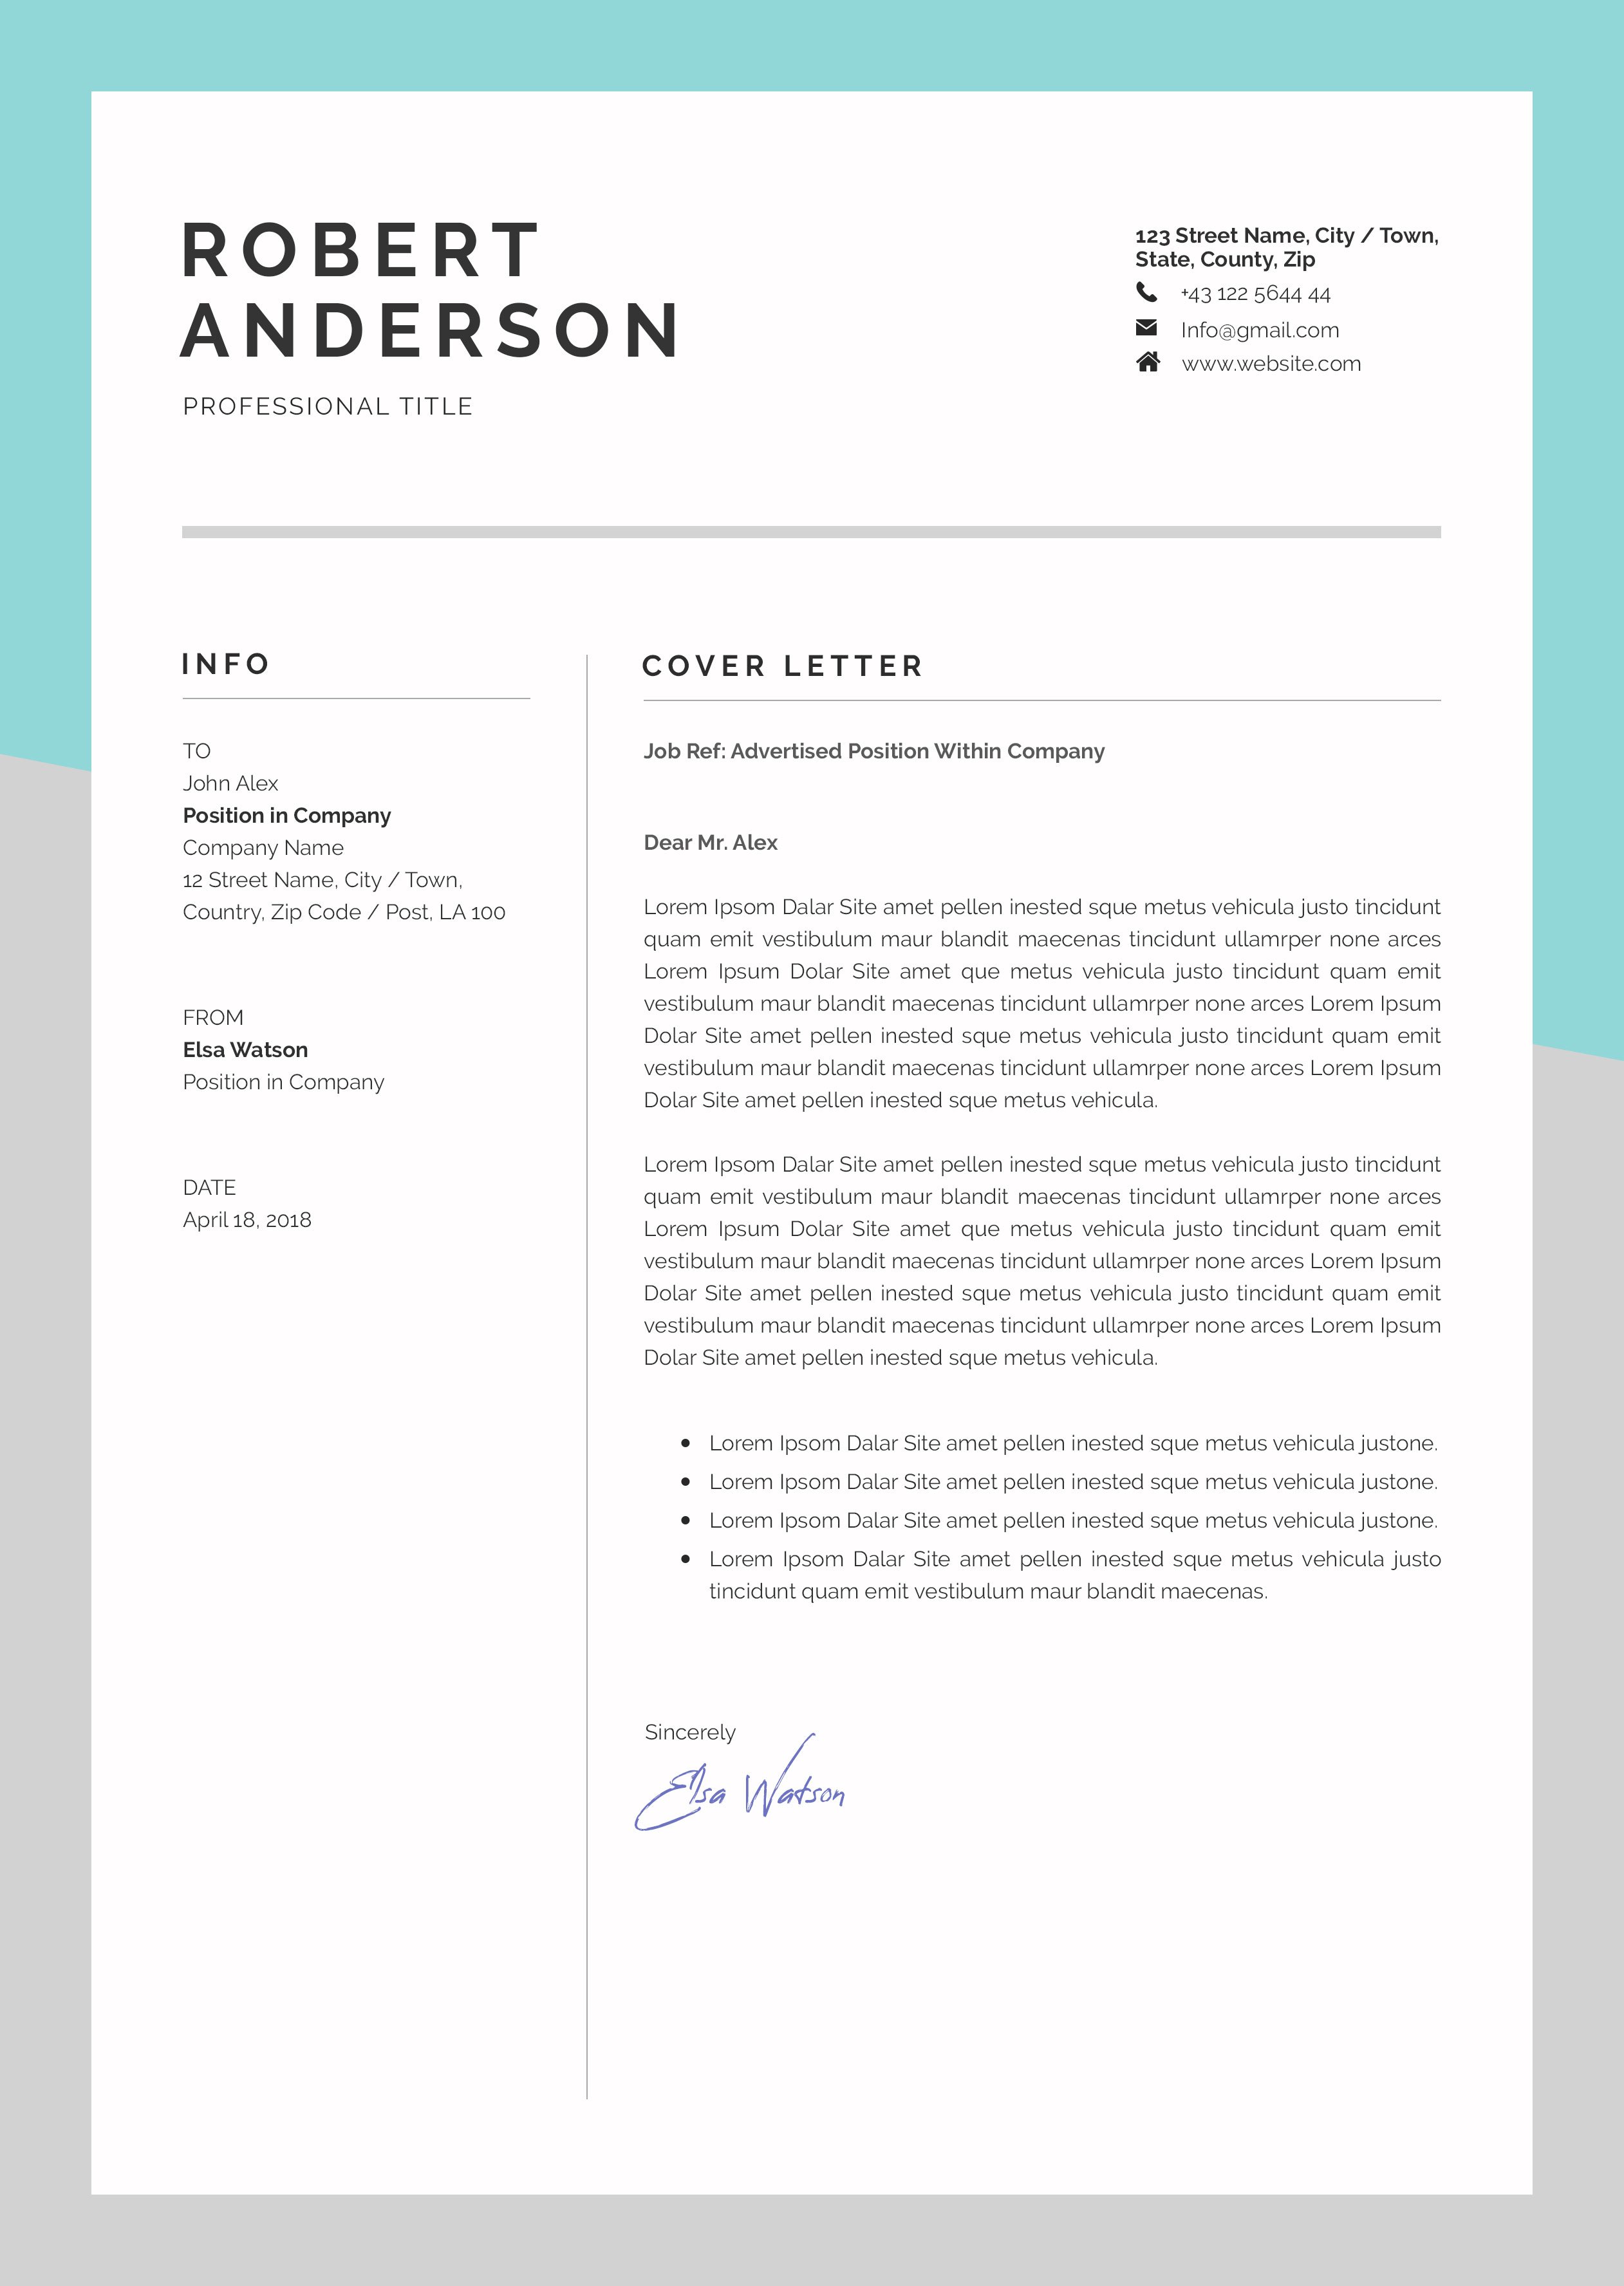 cover letter 302